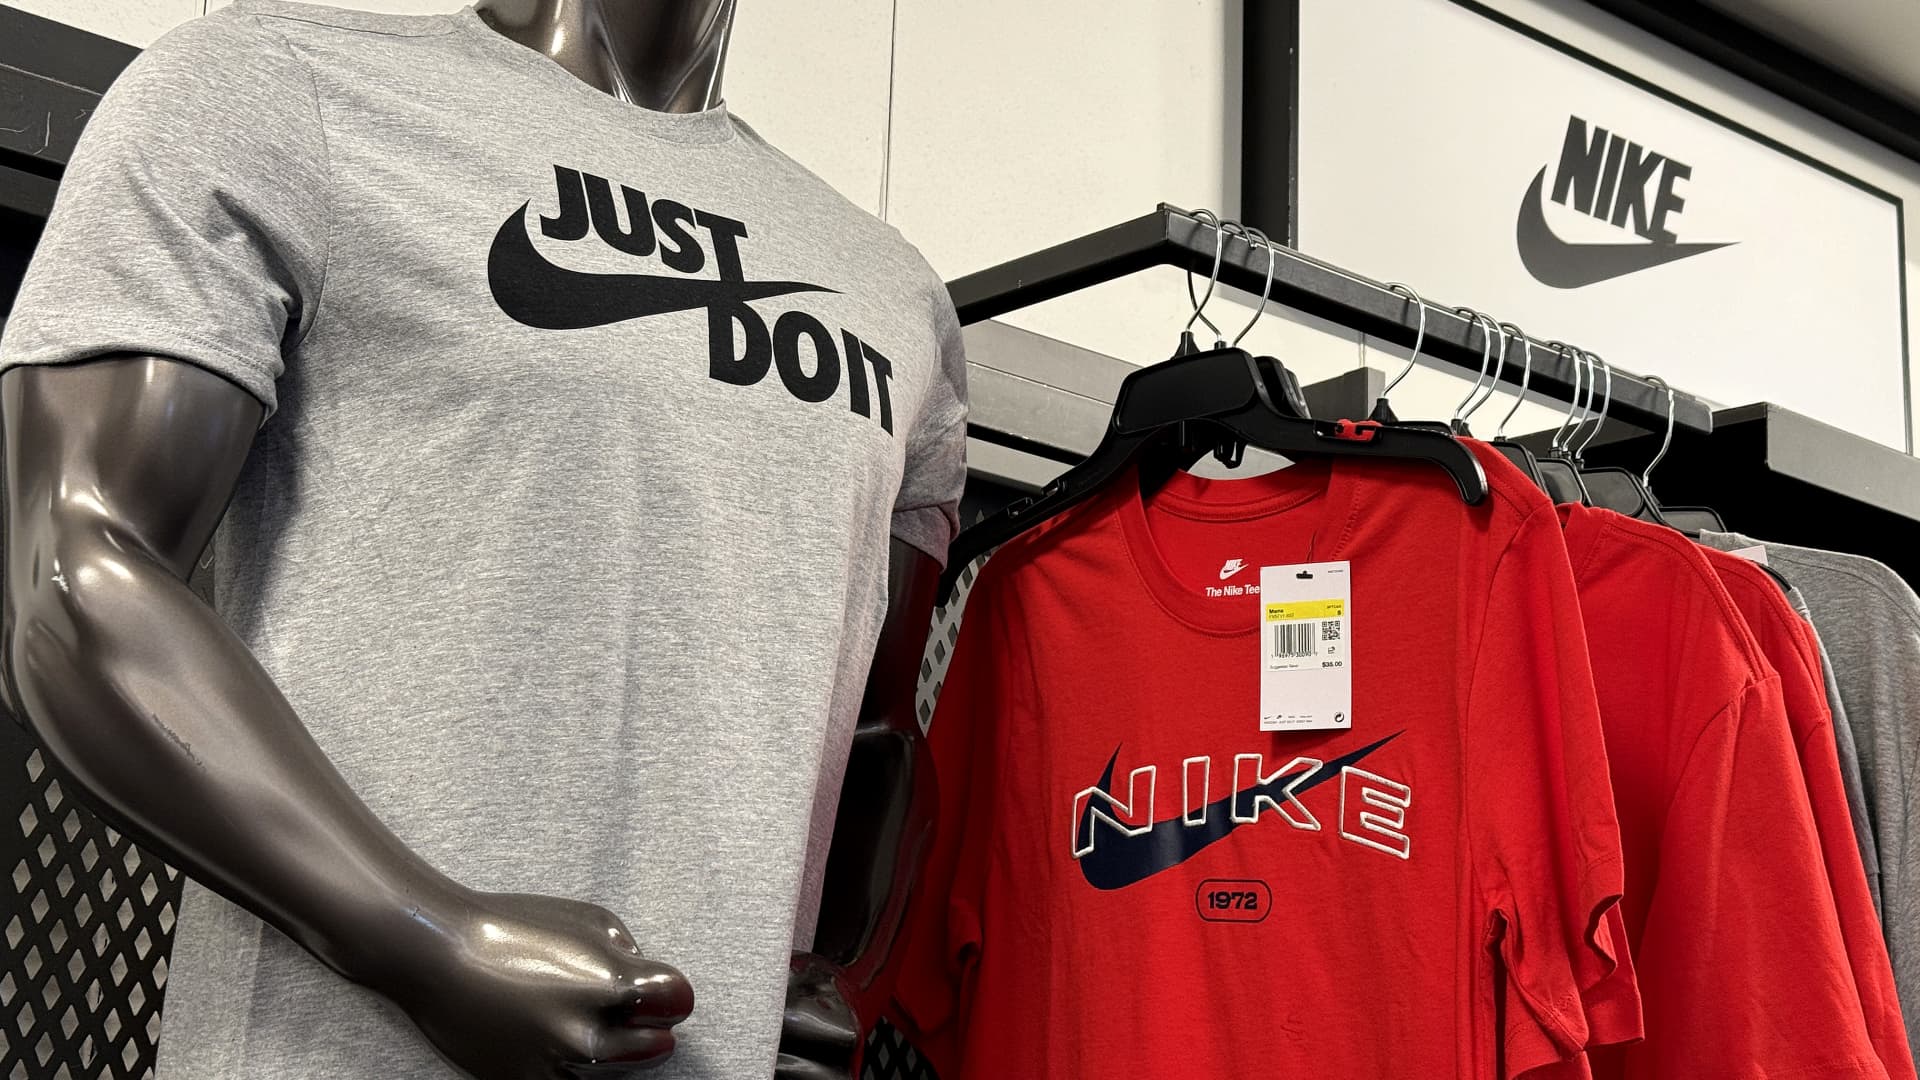 Jim Cramer says it’s too early to buy Nike  but likes these 3 stocks [Video]